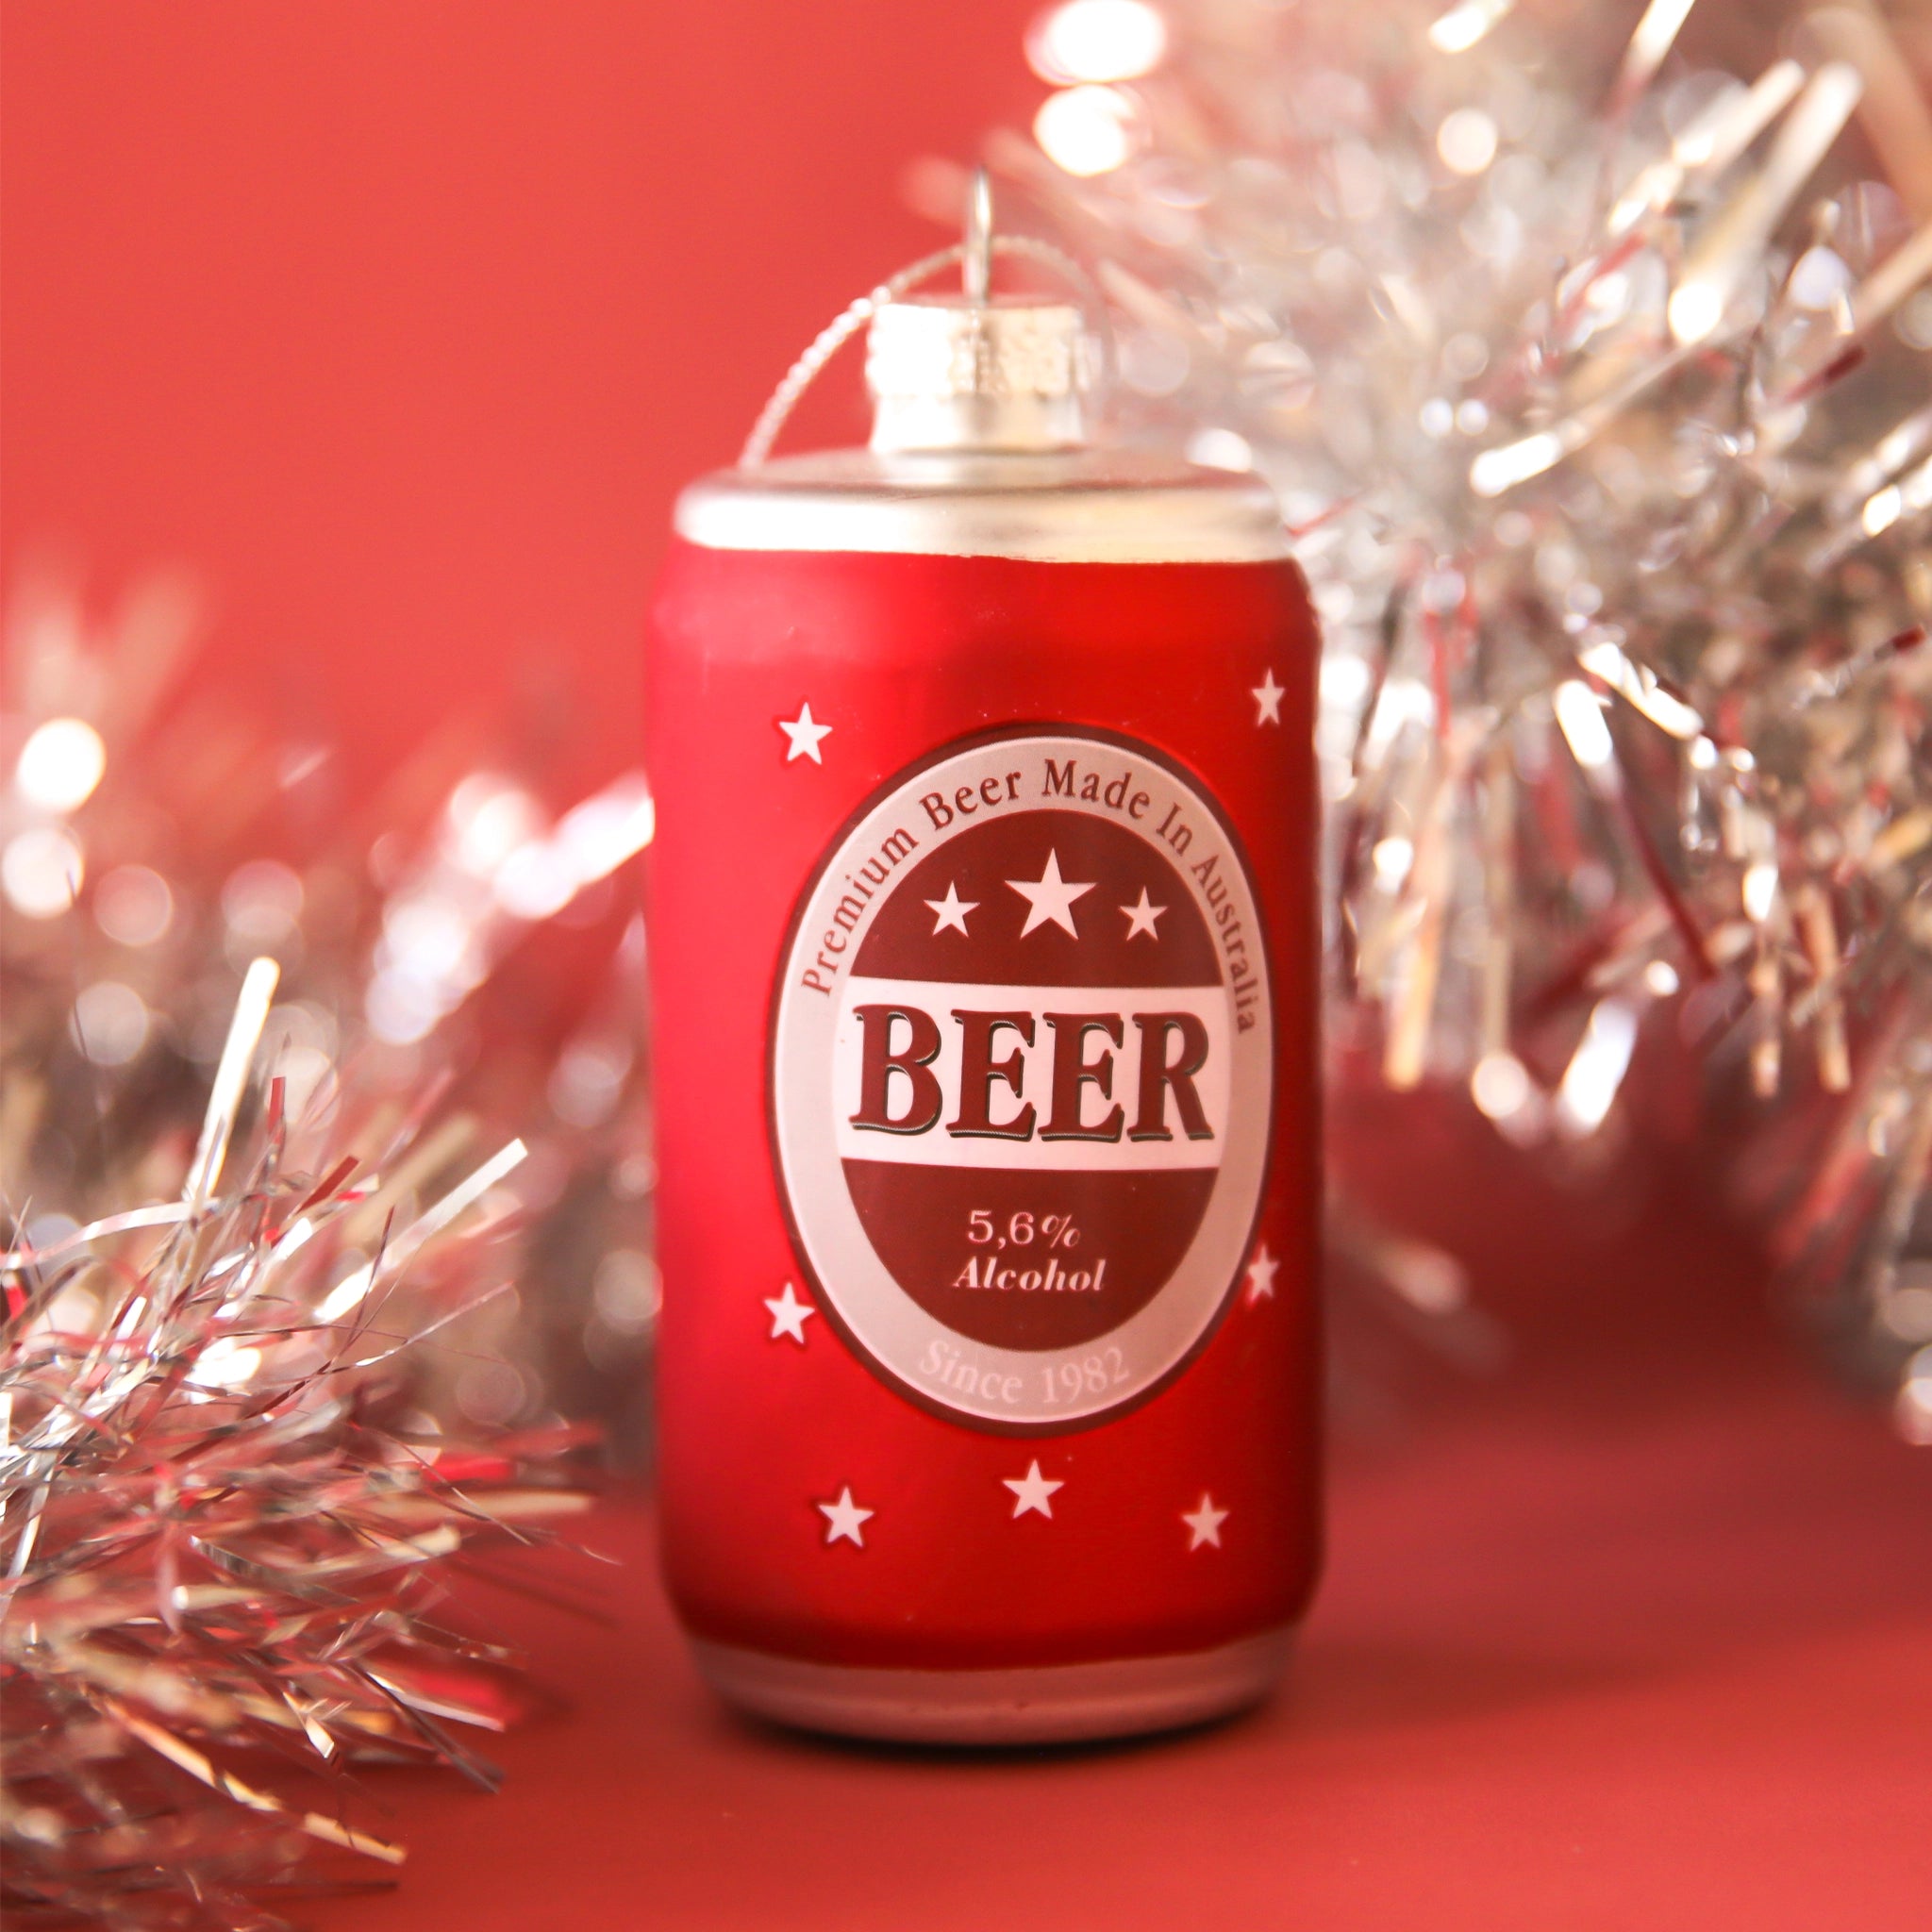 On a red tinsel background is a glass beer can shaped ornament. 